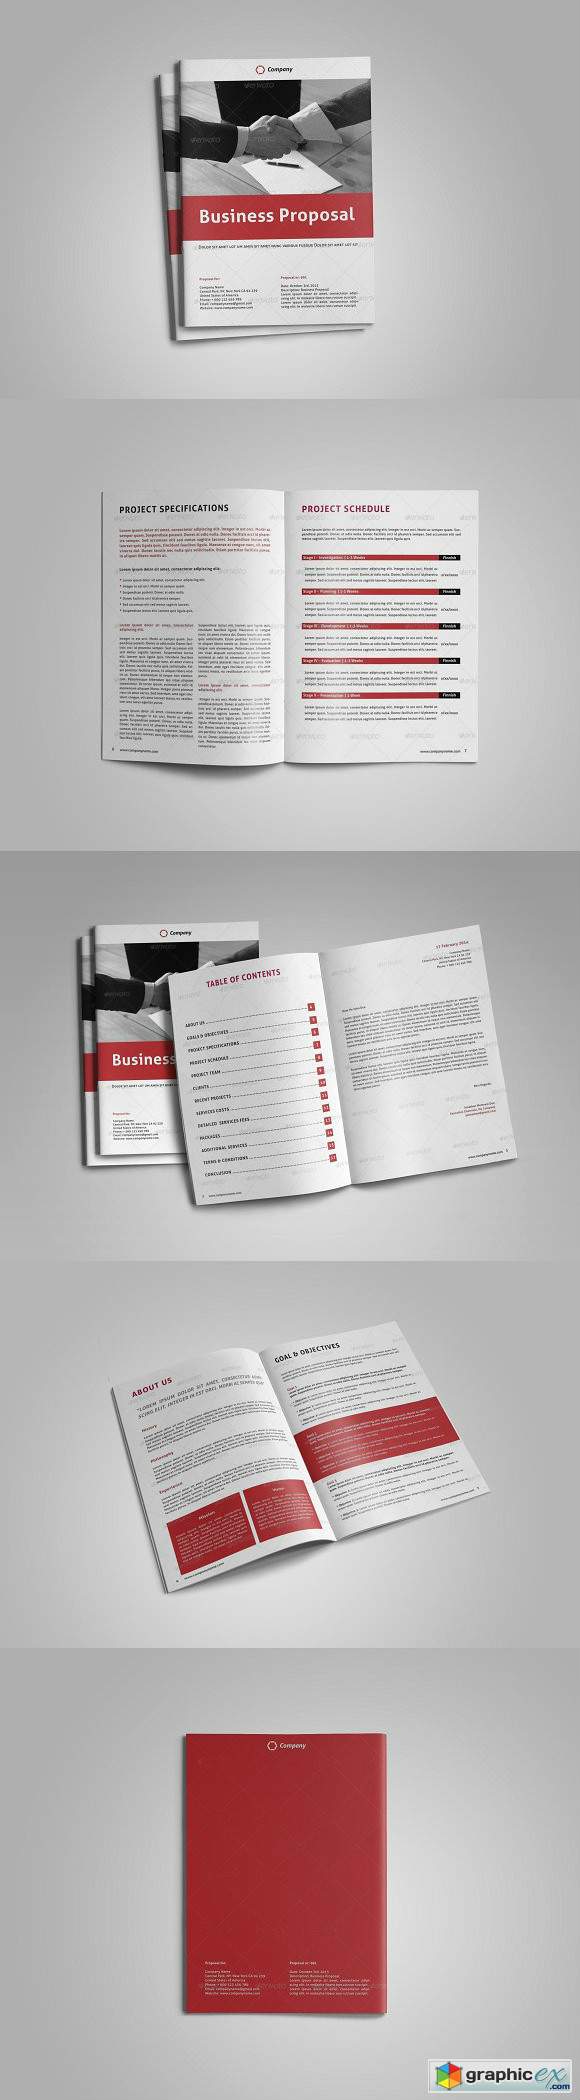 Business Proposal Template 1583482